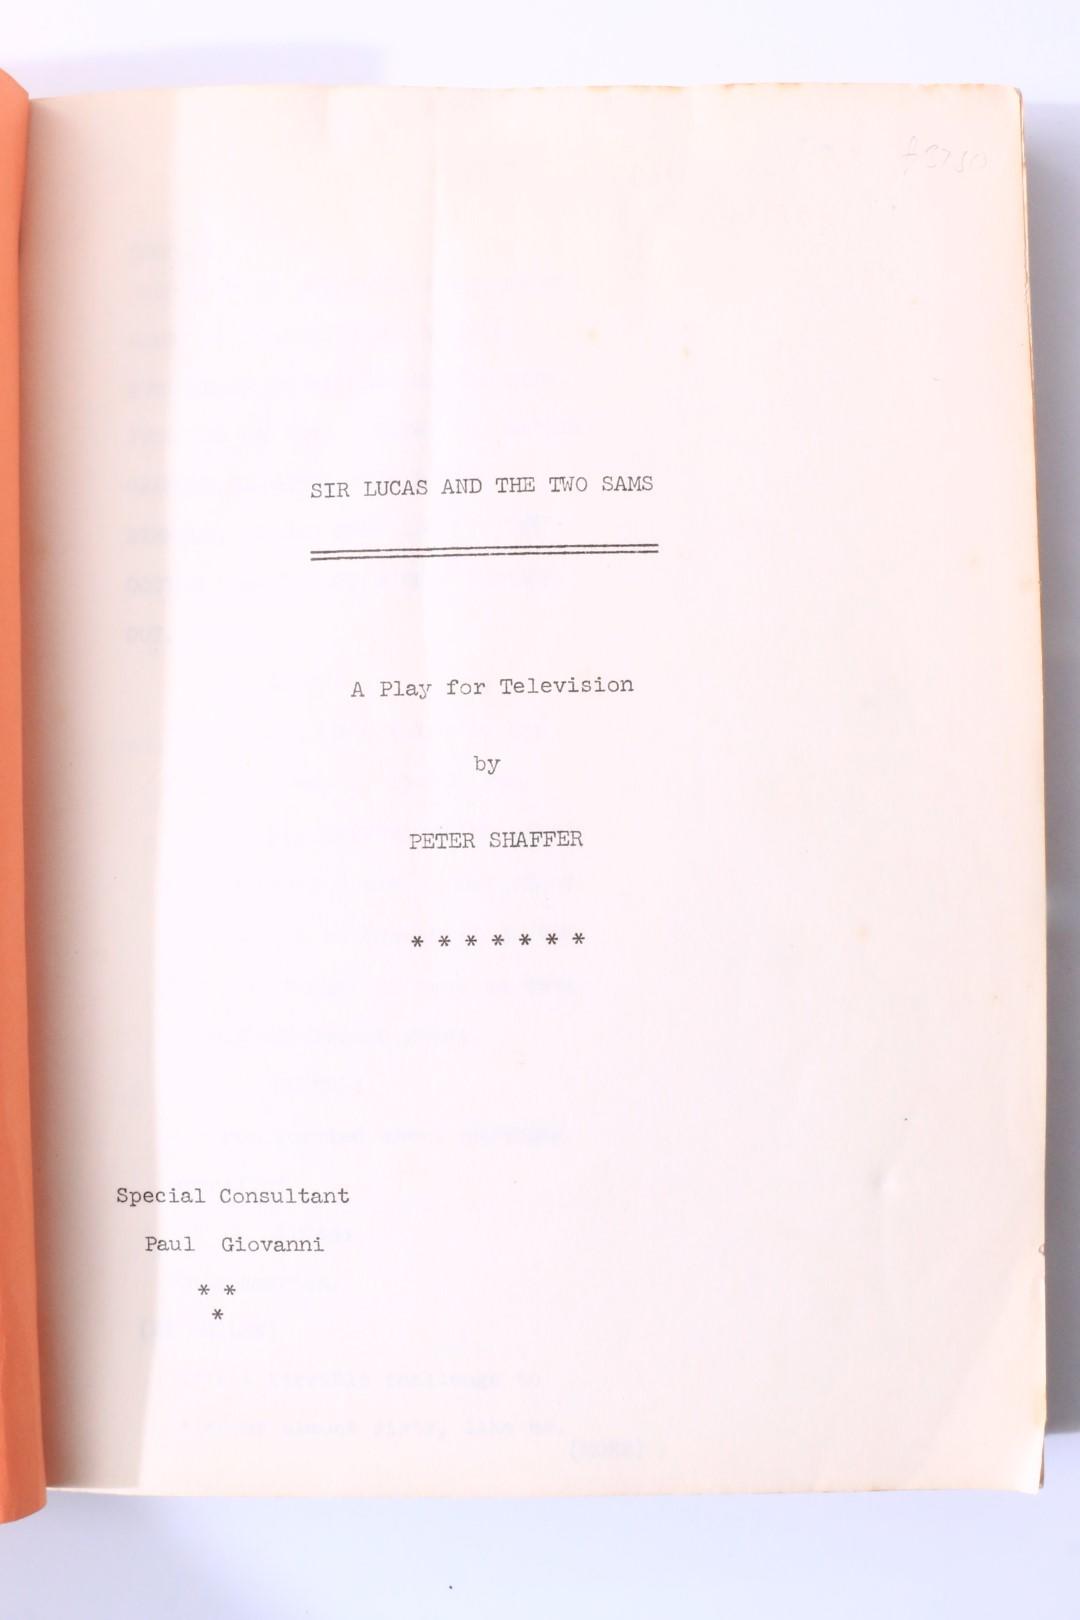 Peter Shaffer - Sir Lucas and the Two Sams: A Play for Television - None, n.d. [1967], Manuscript.